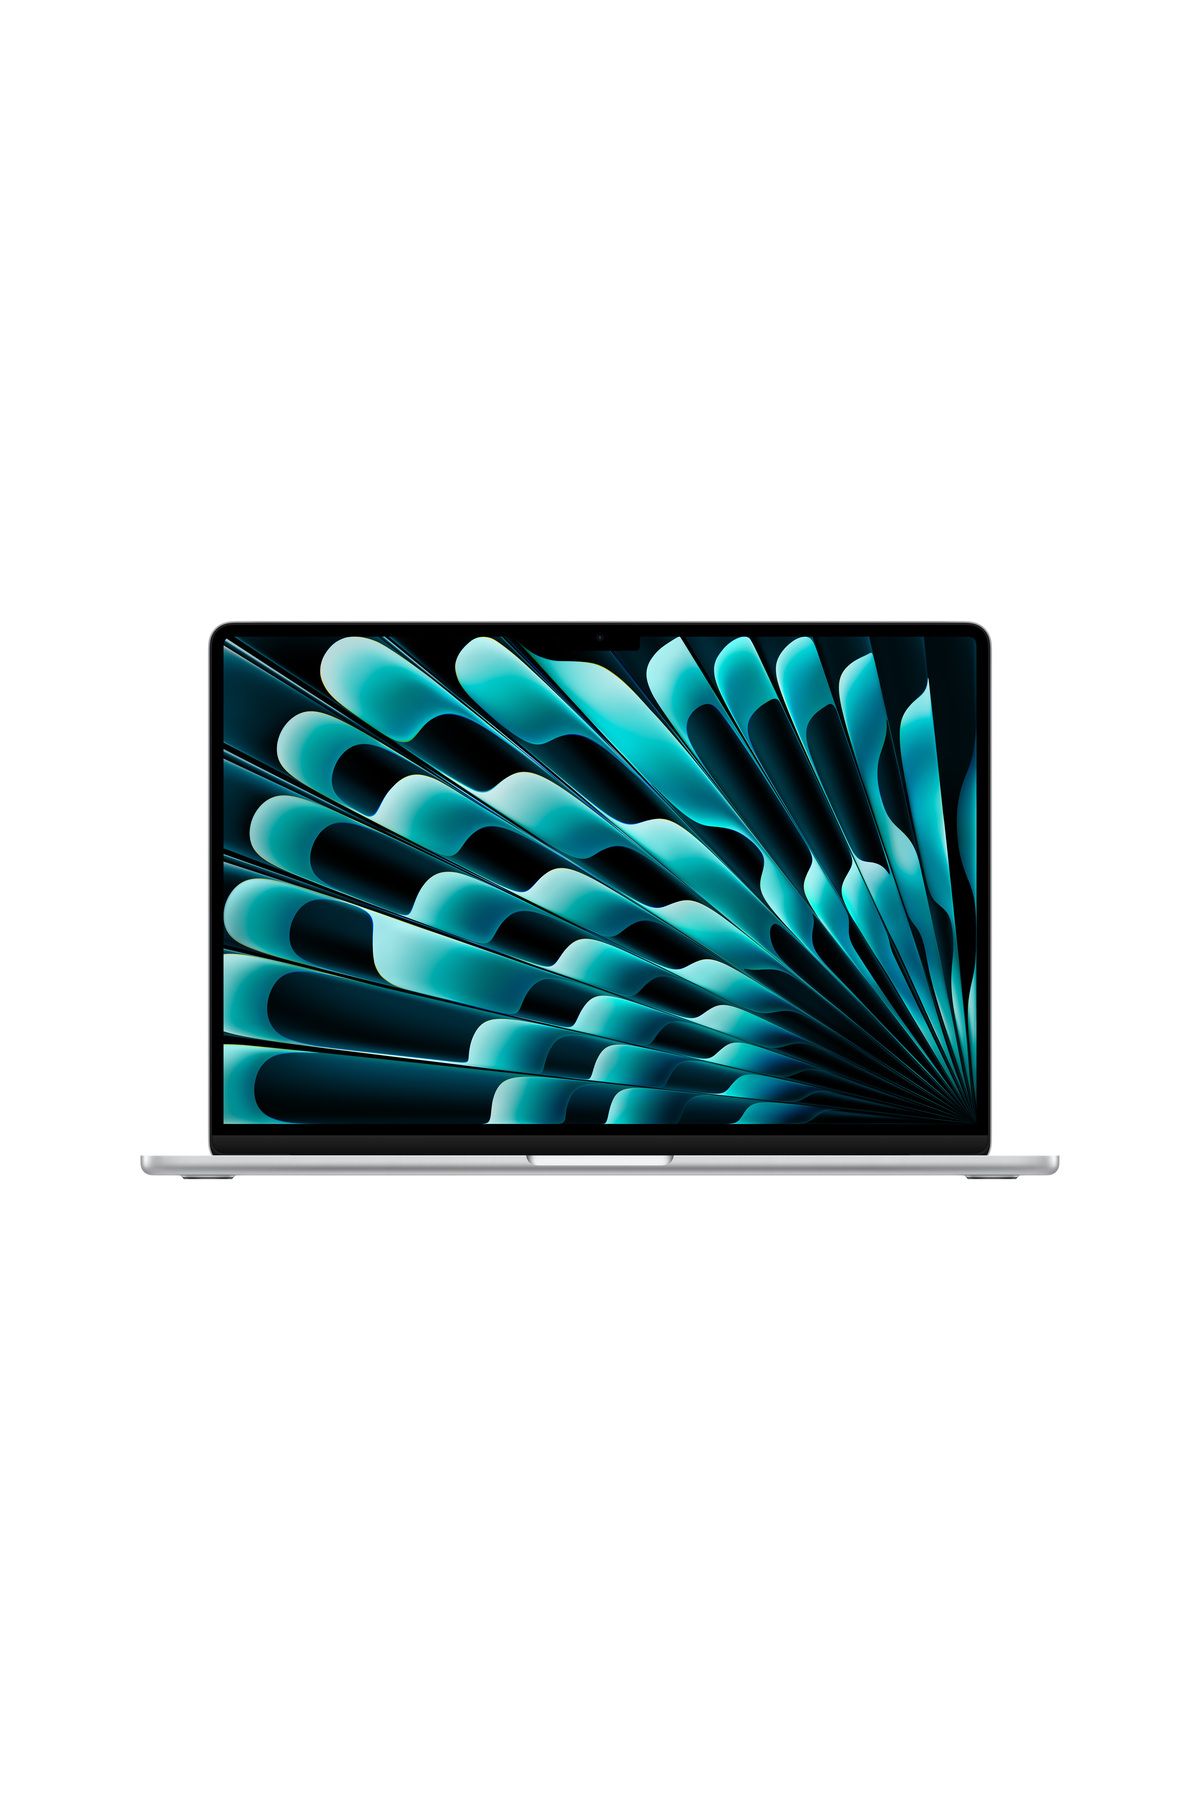 Apple 15-inch MacBook Air: Apple M3 chip with 8-core CPU and 10-core GPU, 8GB, 512GB SSD - Silver